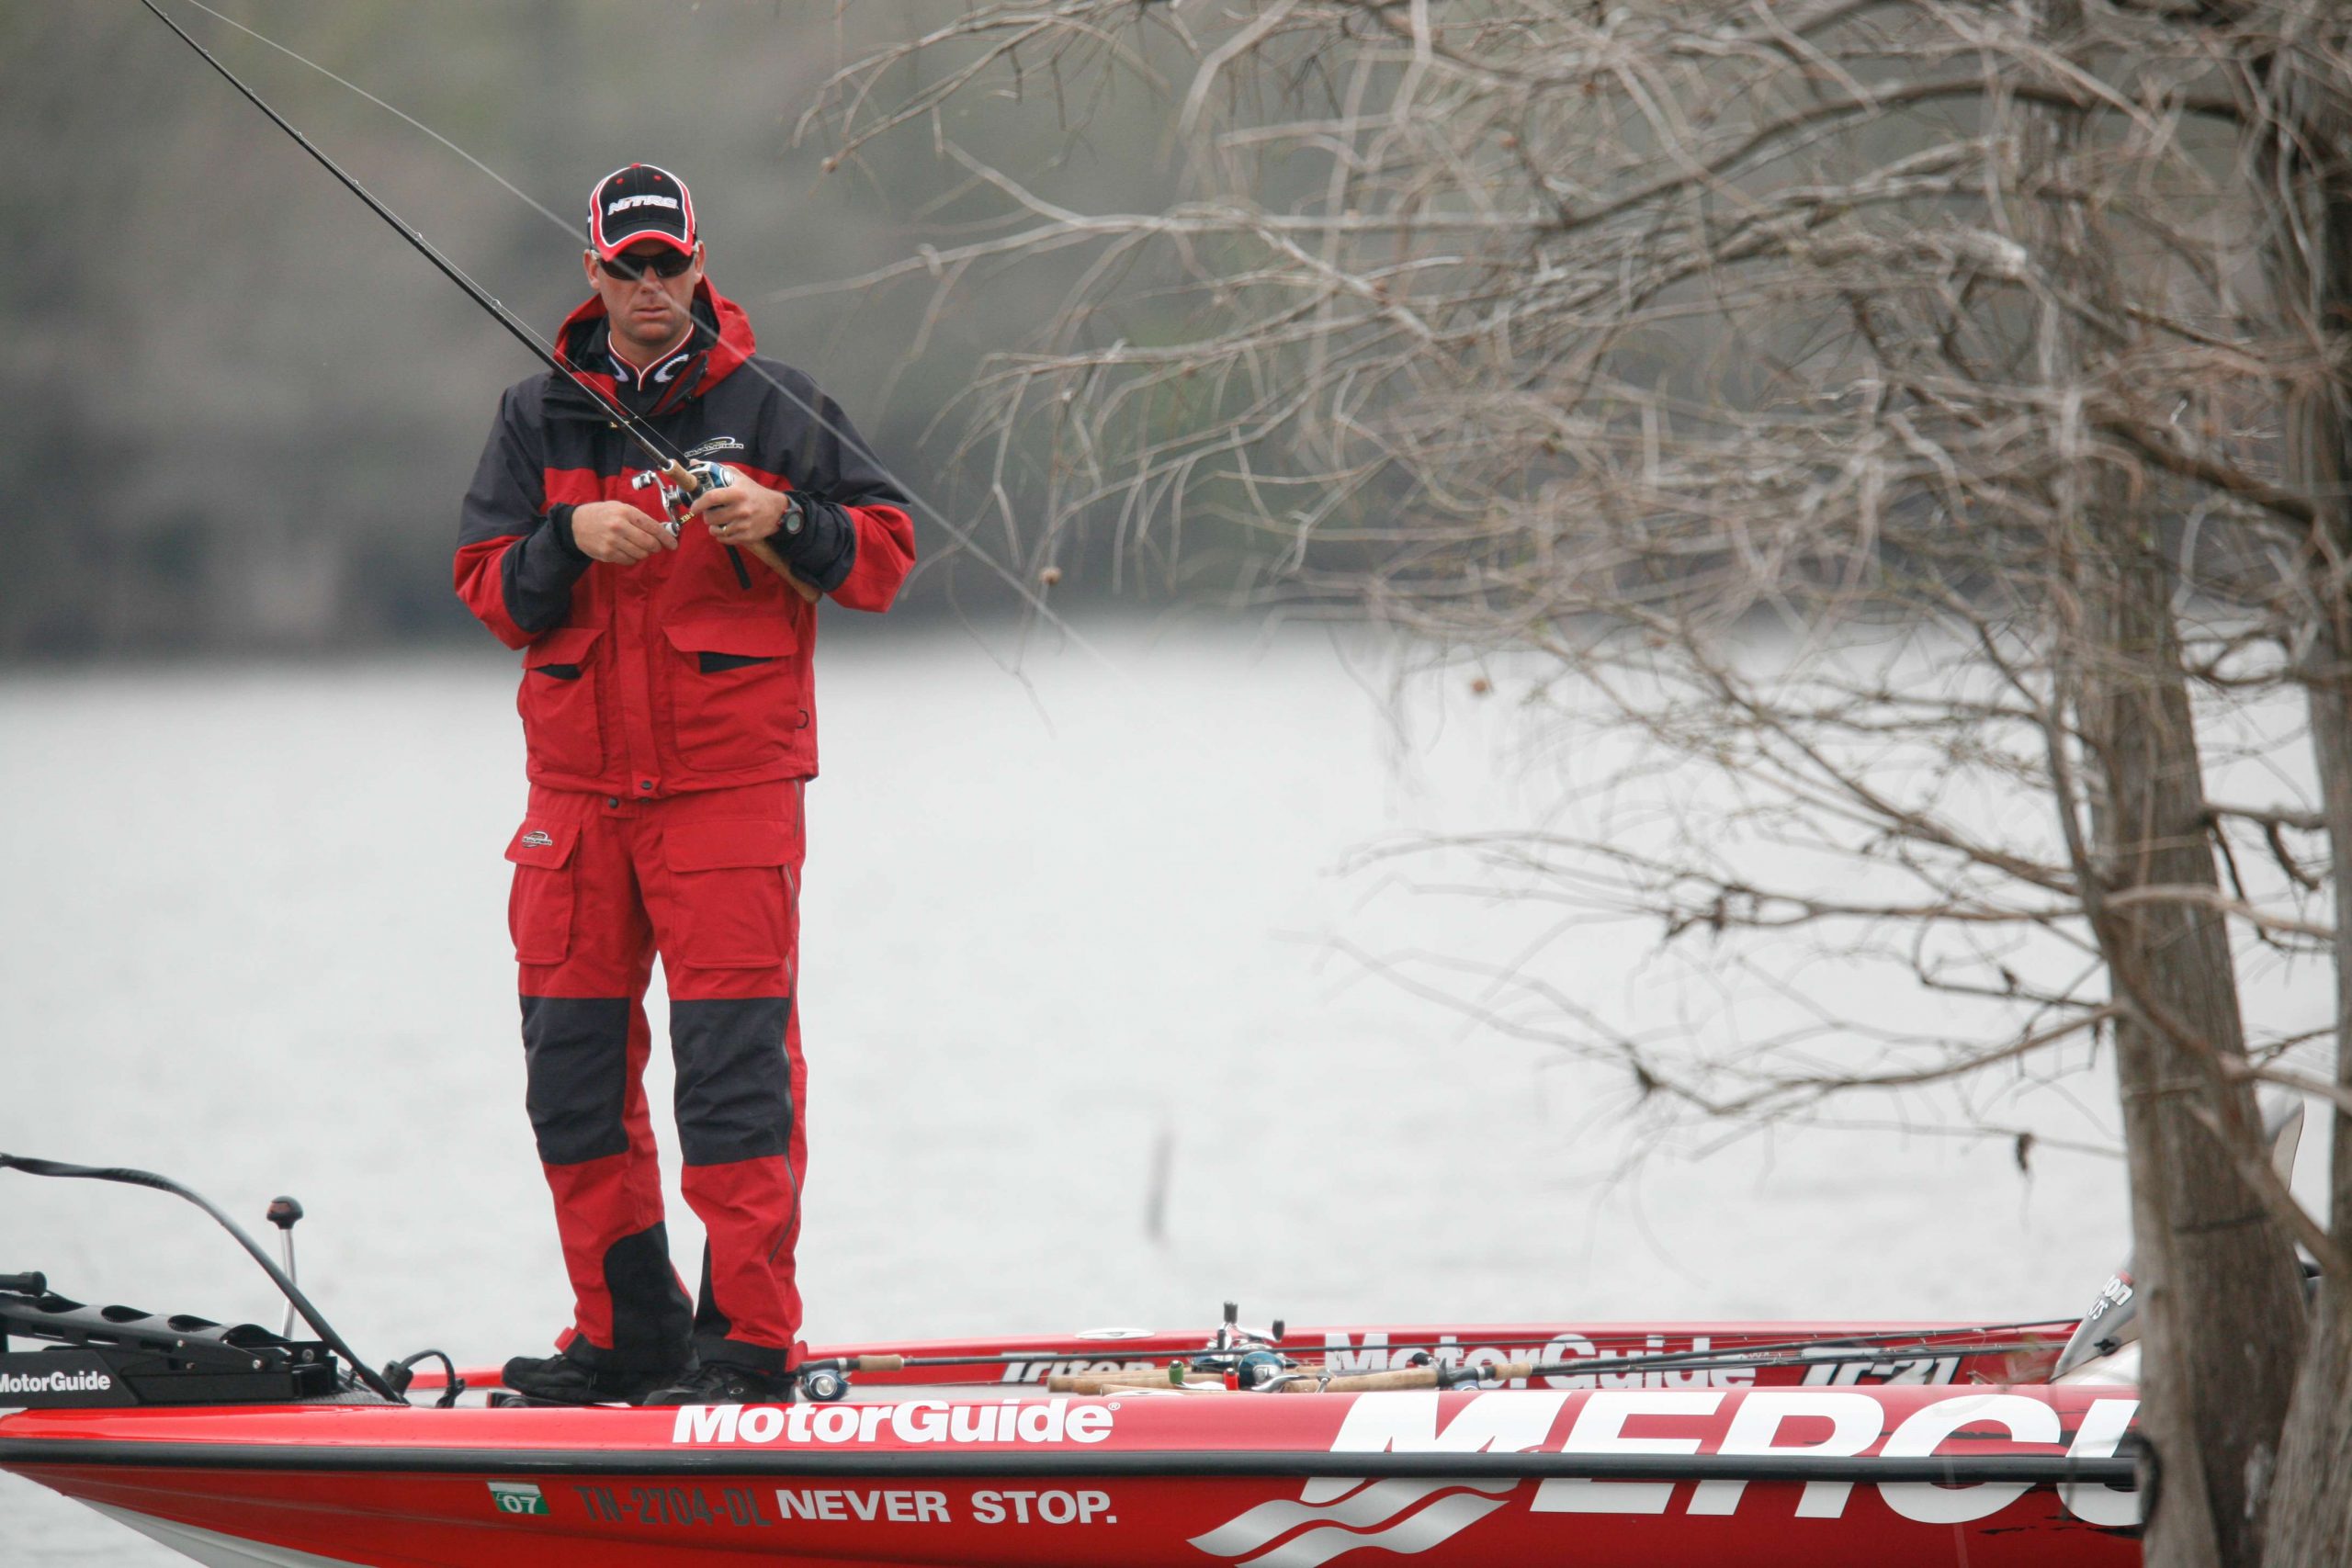 The Elite Series hasn't been to Sam Rayburn in a while. Here's Kevin VanDam fishing at the Elite tournament there in 2006. Although KVD is not from the Lone Star State, he may deserve dual citizenship. The Michigan angler always places high in Texas events ... and won the last one he fished there (2016 Toledo Bend Elite).